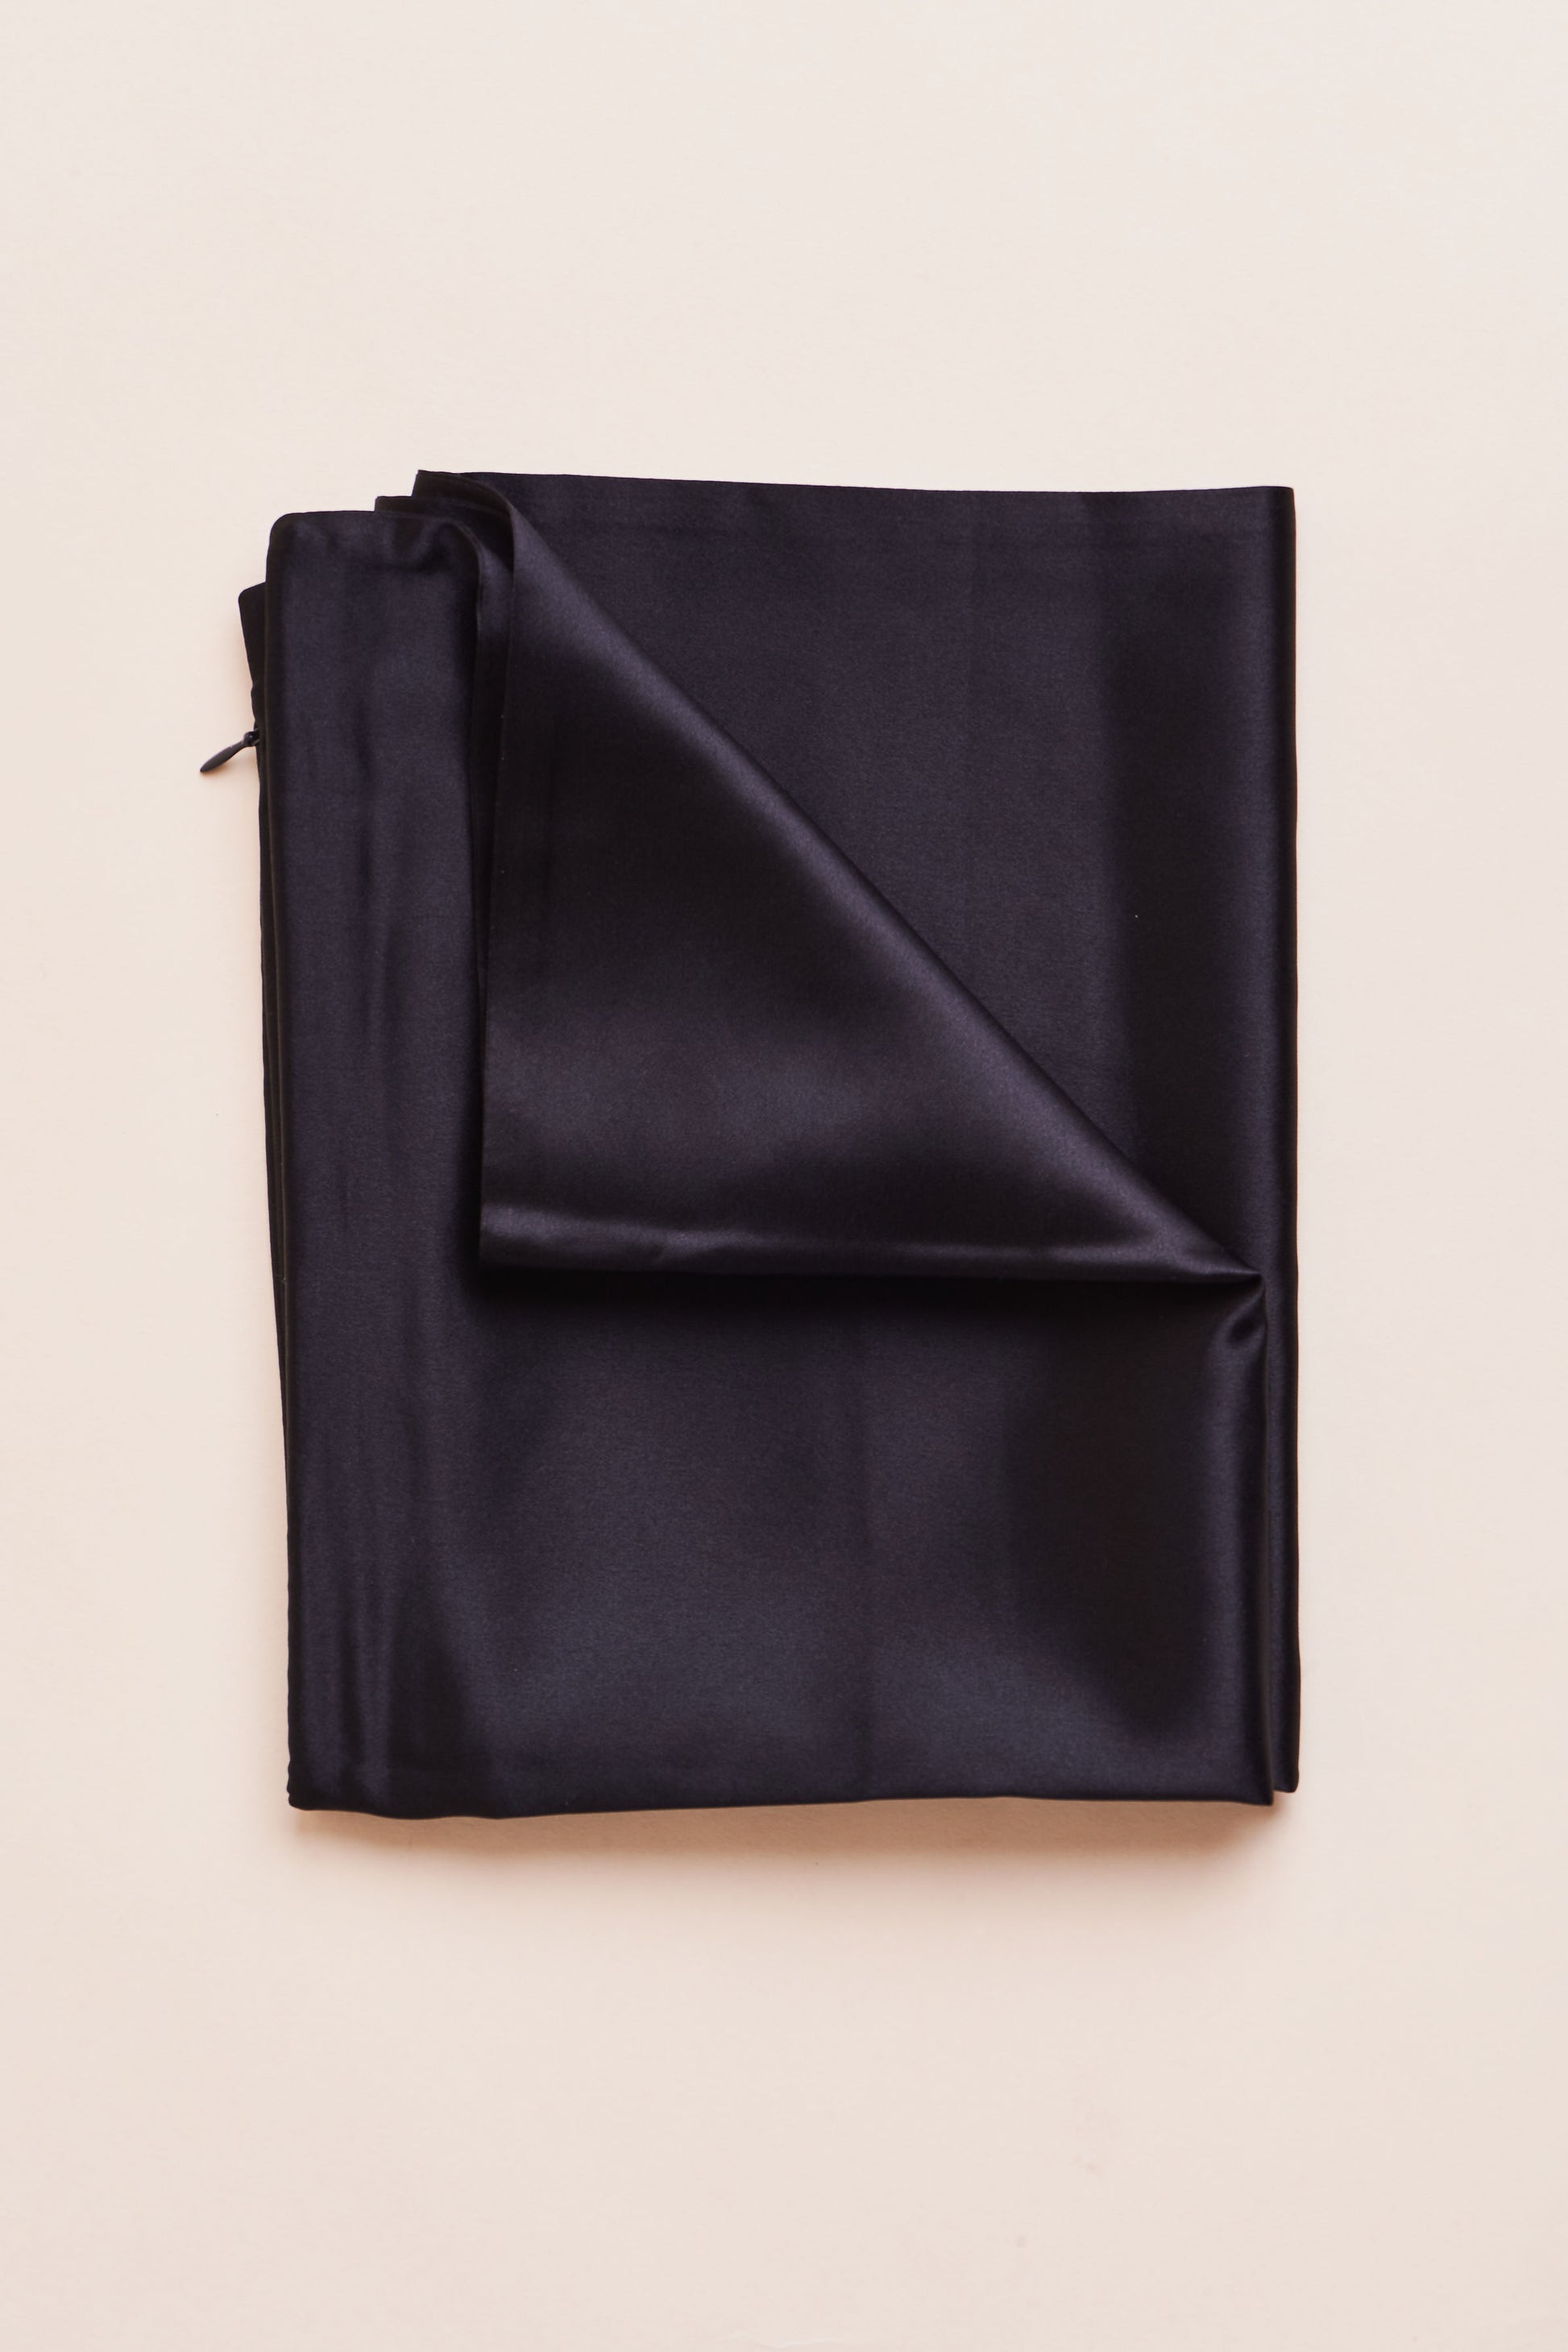 Black Silk Pillowcase  Buy Online with Worldwide Delivery